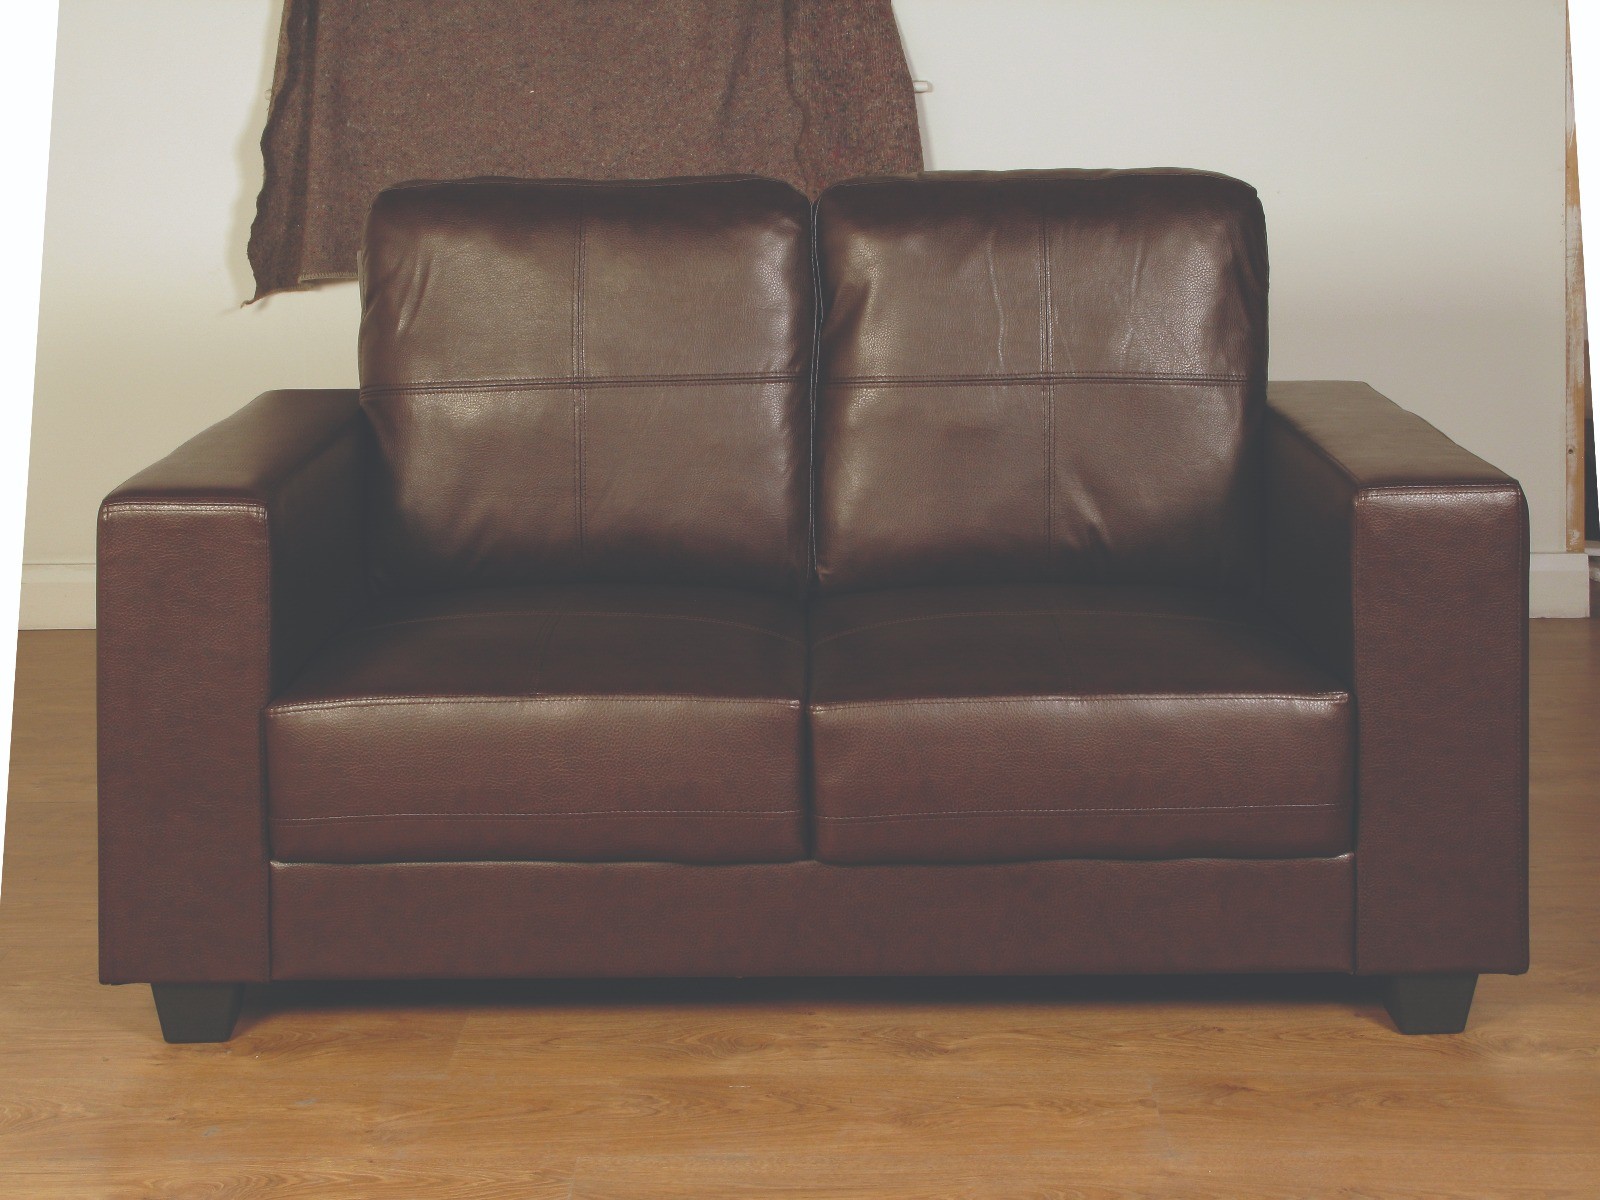 Queensway Brown Faux Leather 2 Seater Sofa, Brown Faux Leather Couch